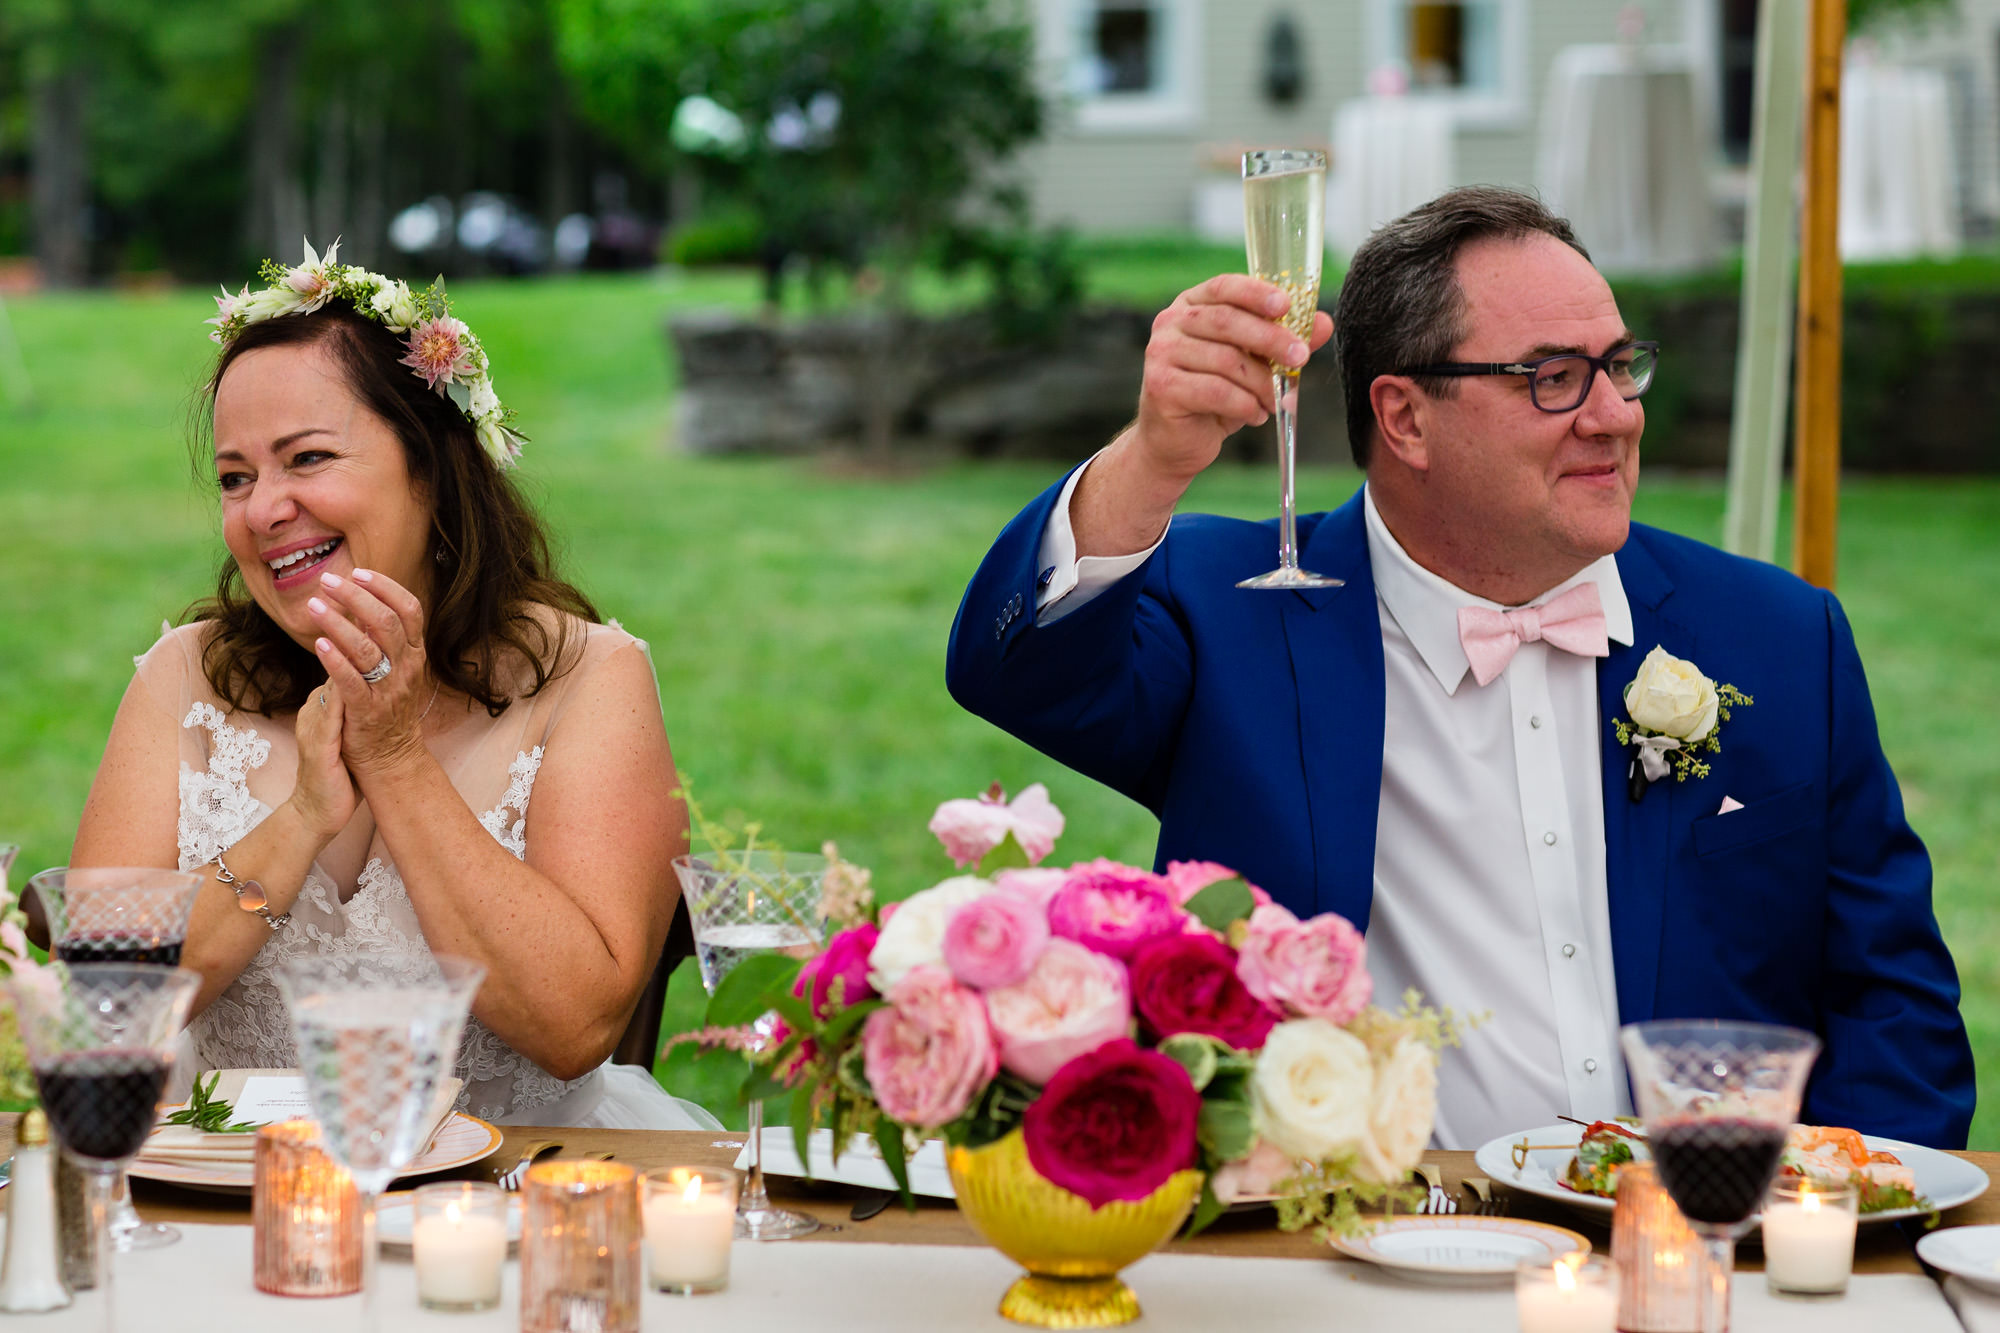 Emotional toasts were shared during Lynn and Mike's wedding